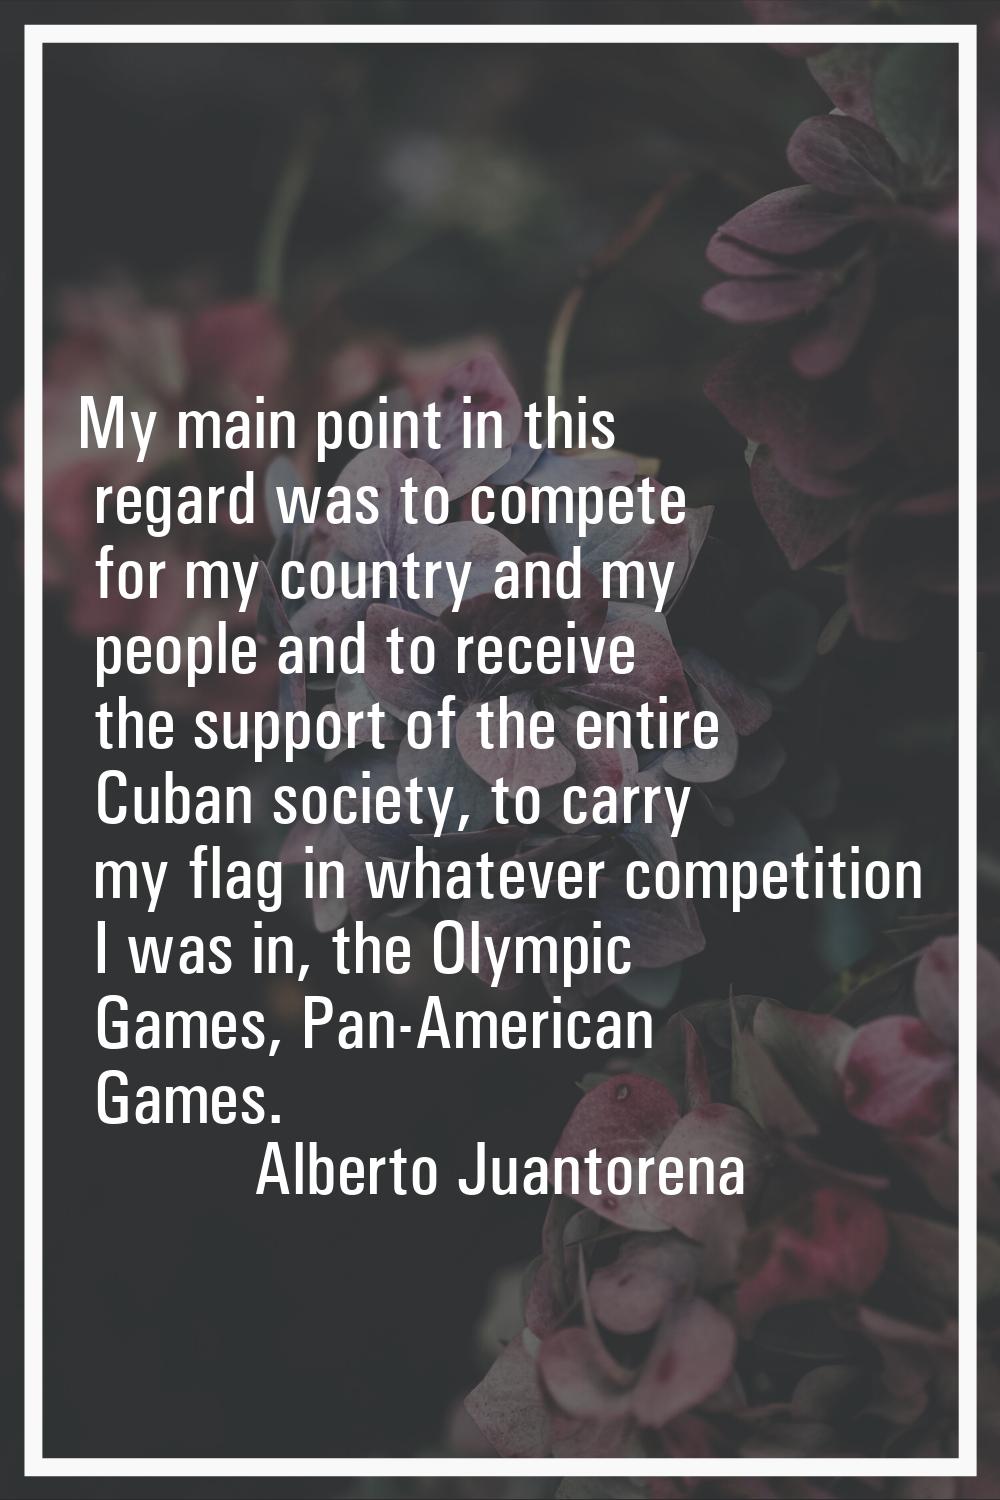 My main point in this regard was to compete for my country and my people and to receive the support